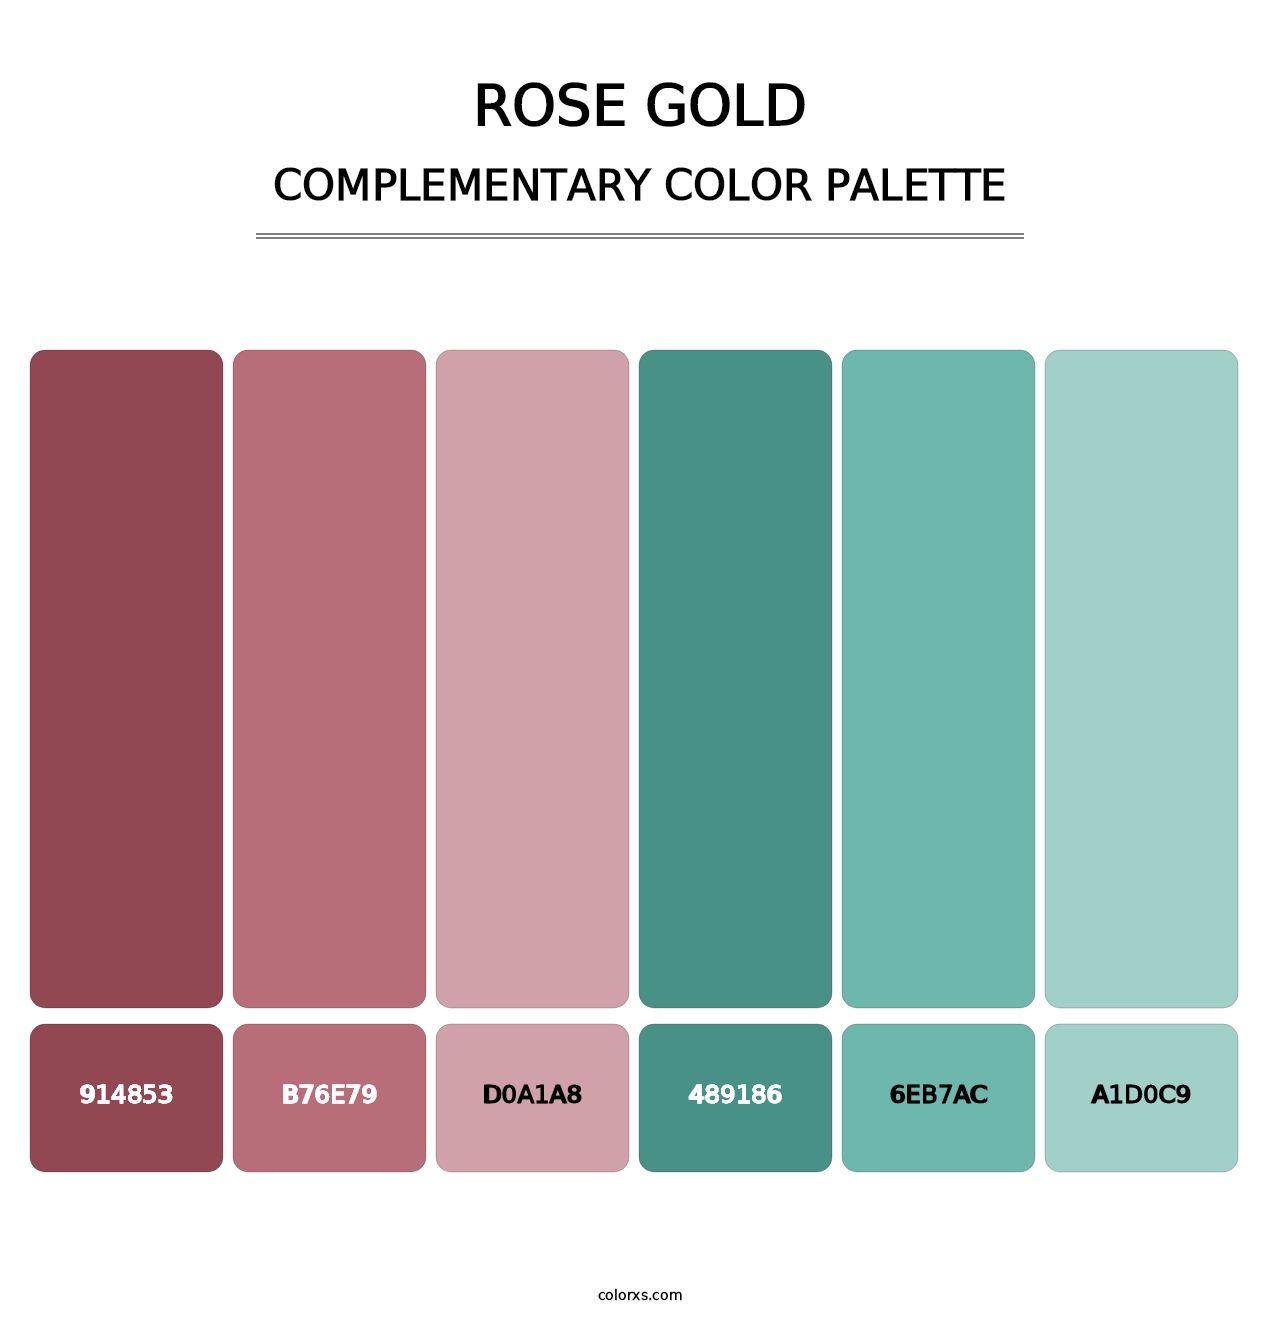 Rose Gold - Complementary Color Palette